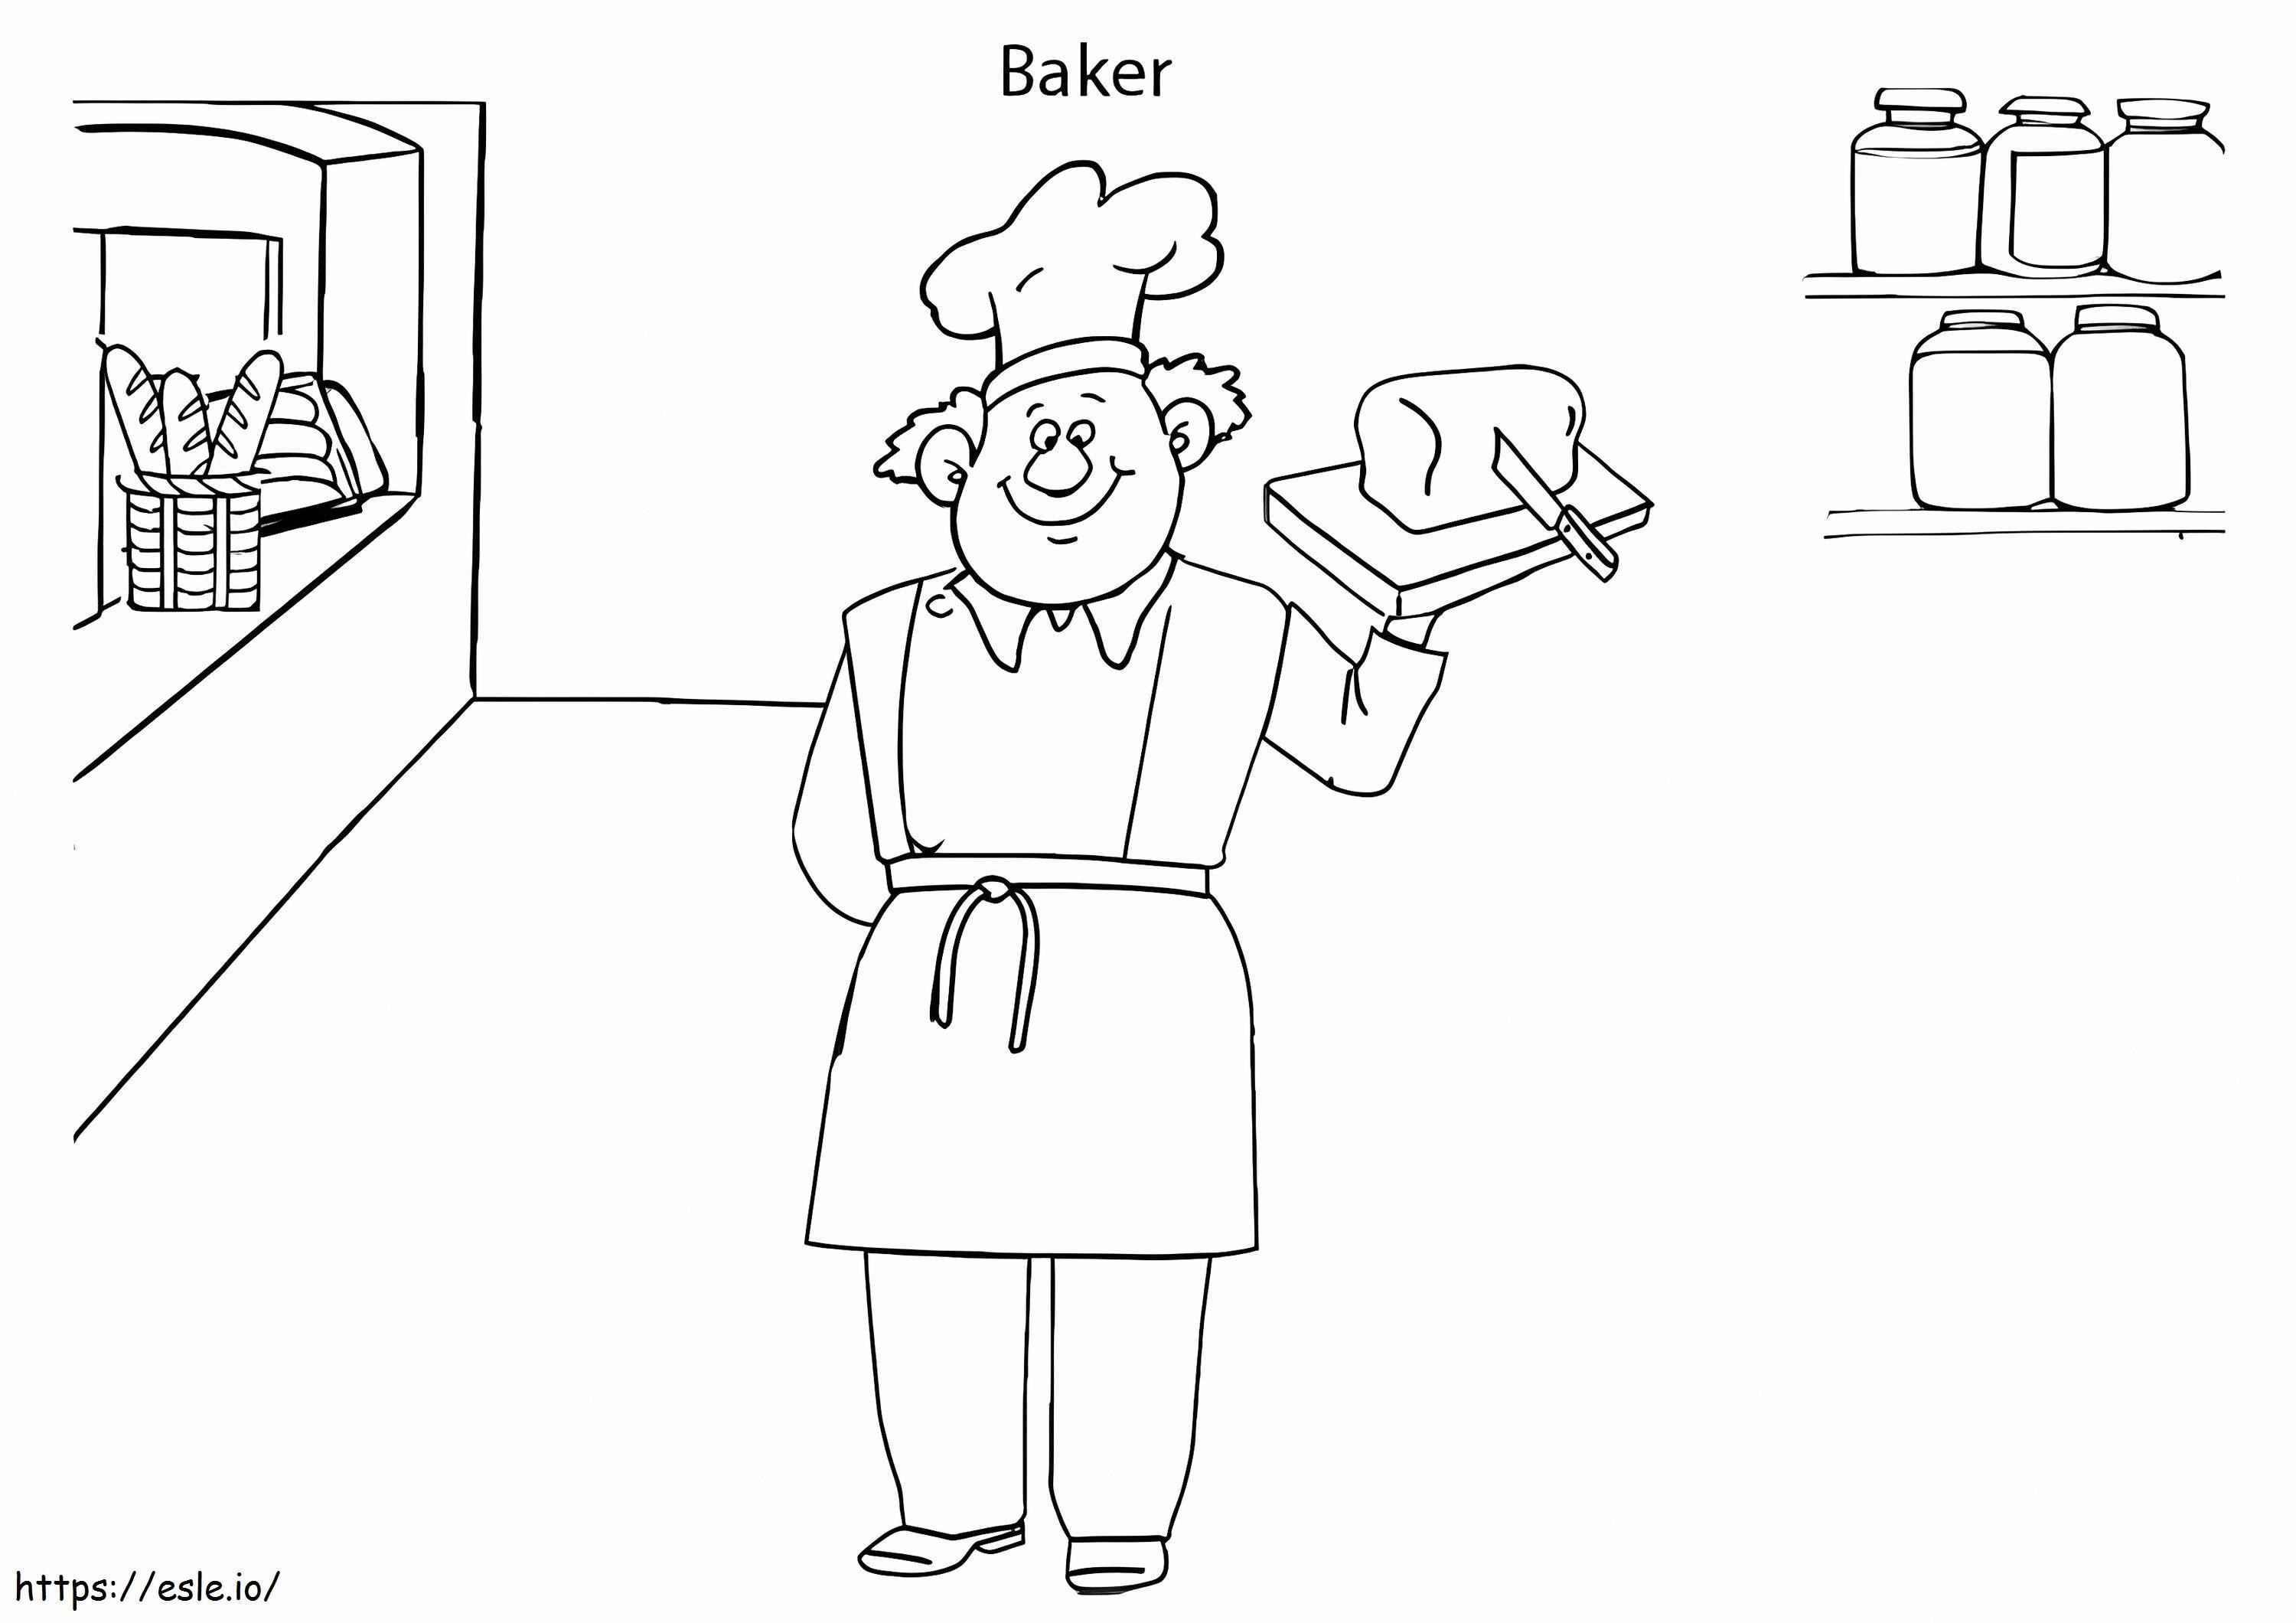 Baker With Bread coloring page